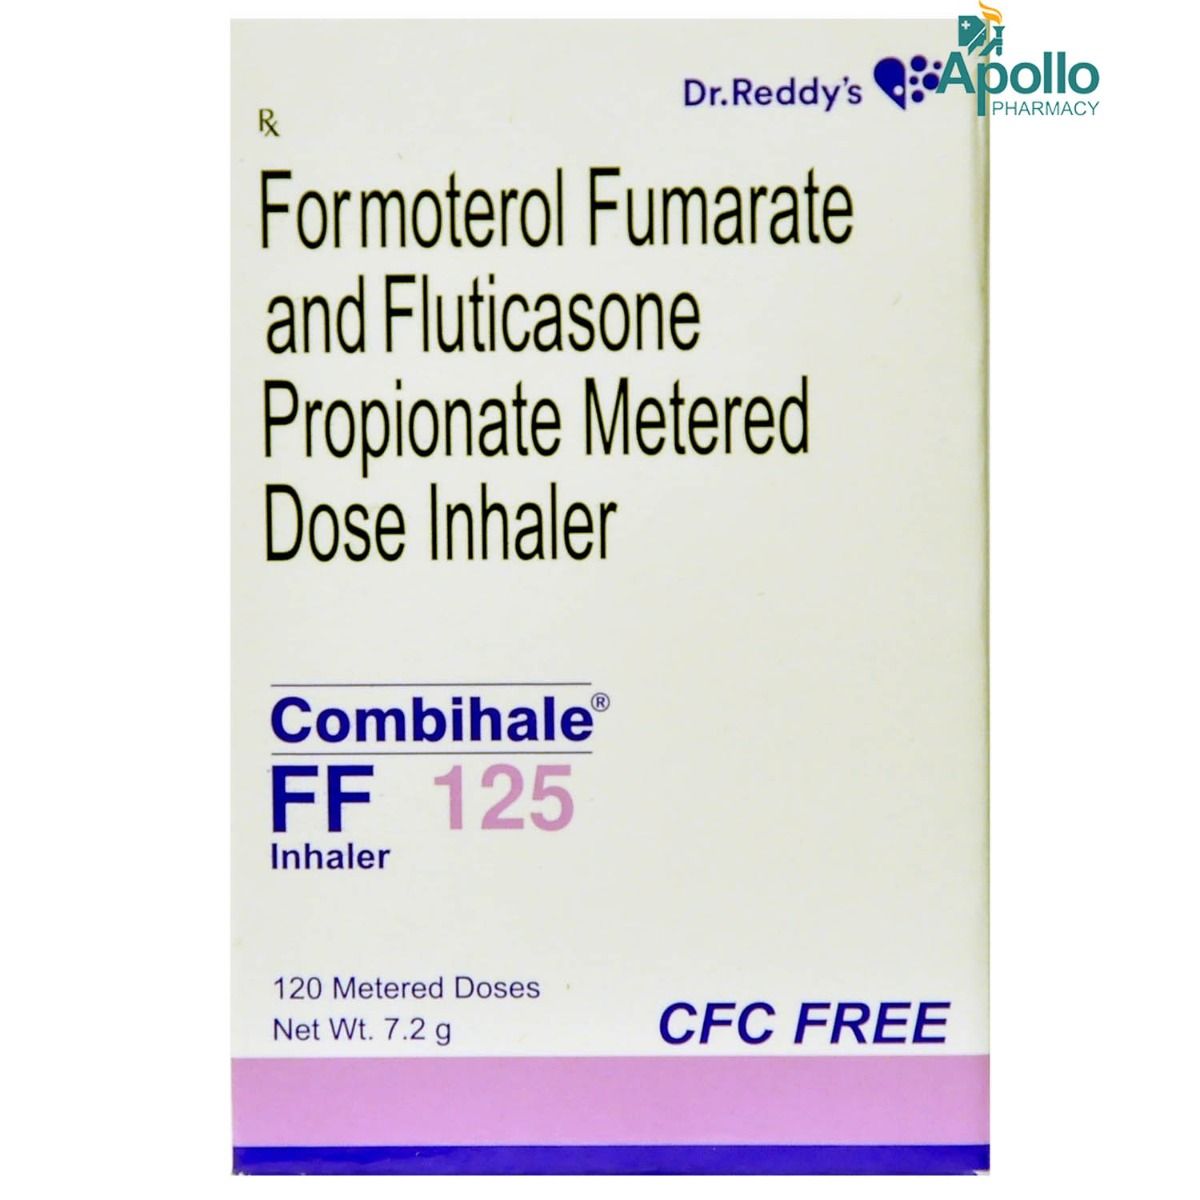 Combihale FF 125mcg Inhaler Price, Uses, Side Effects, Composition ...